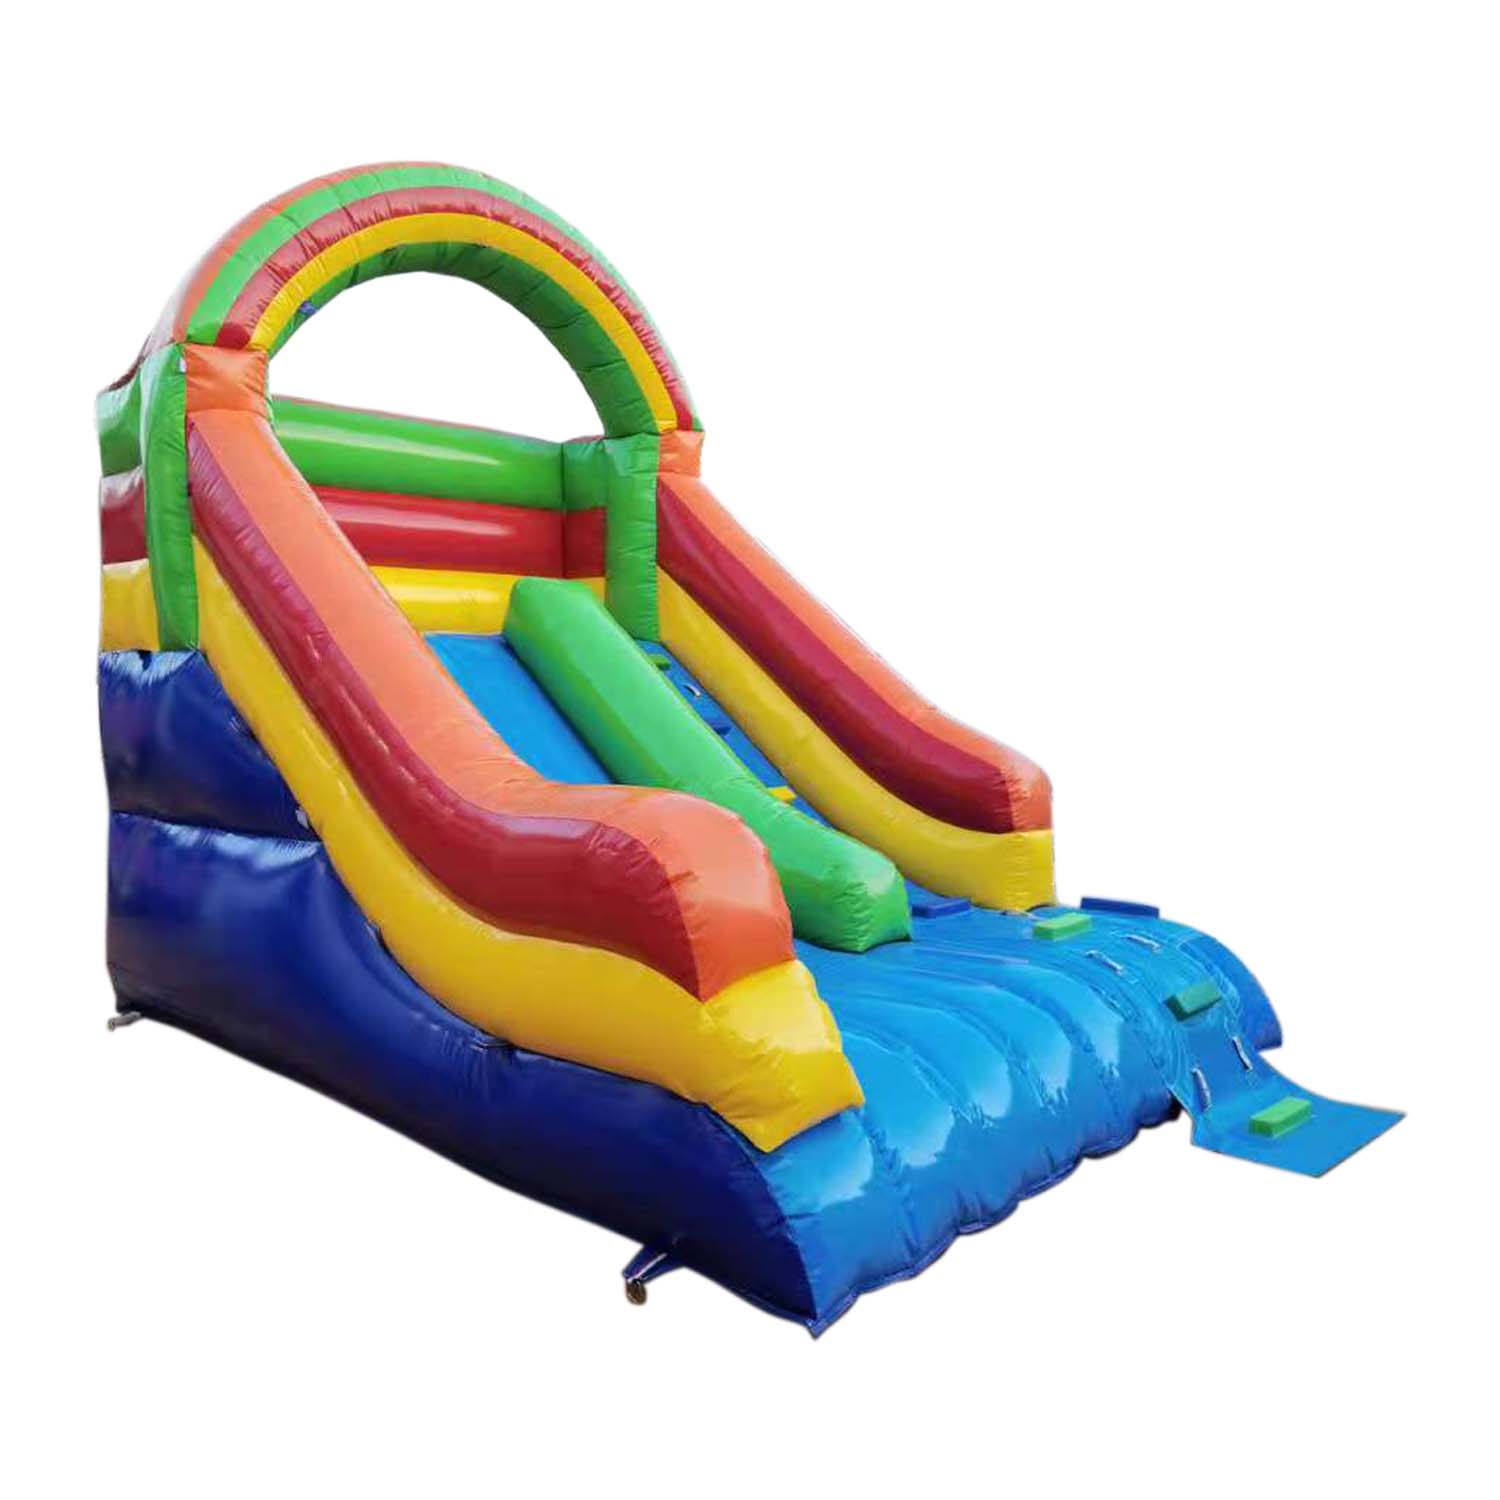 Orilla Piscina - ChileInflable